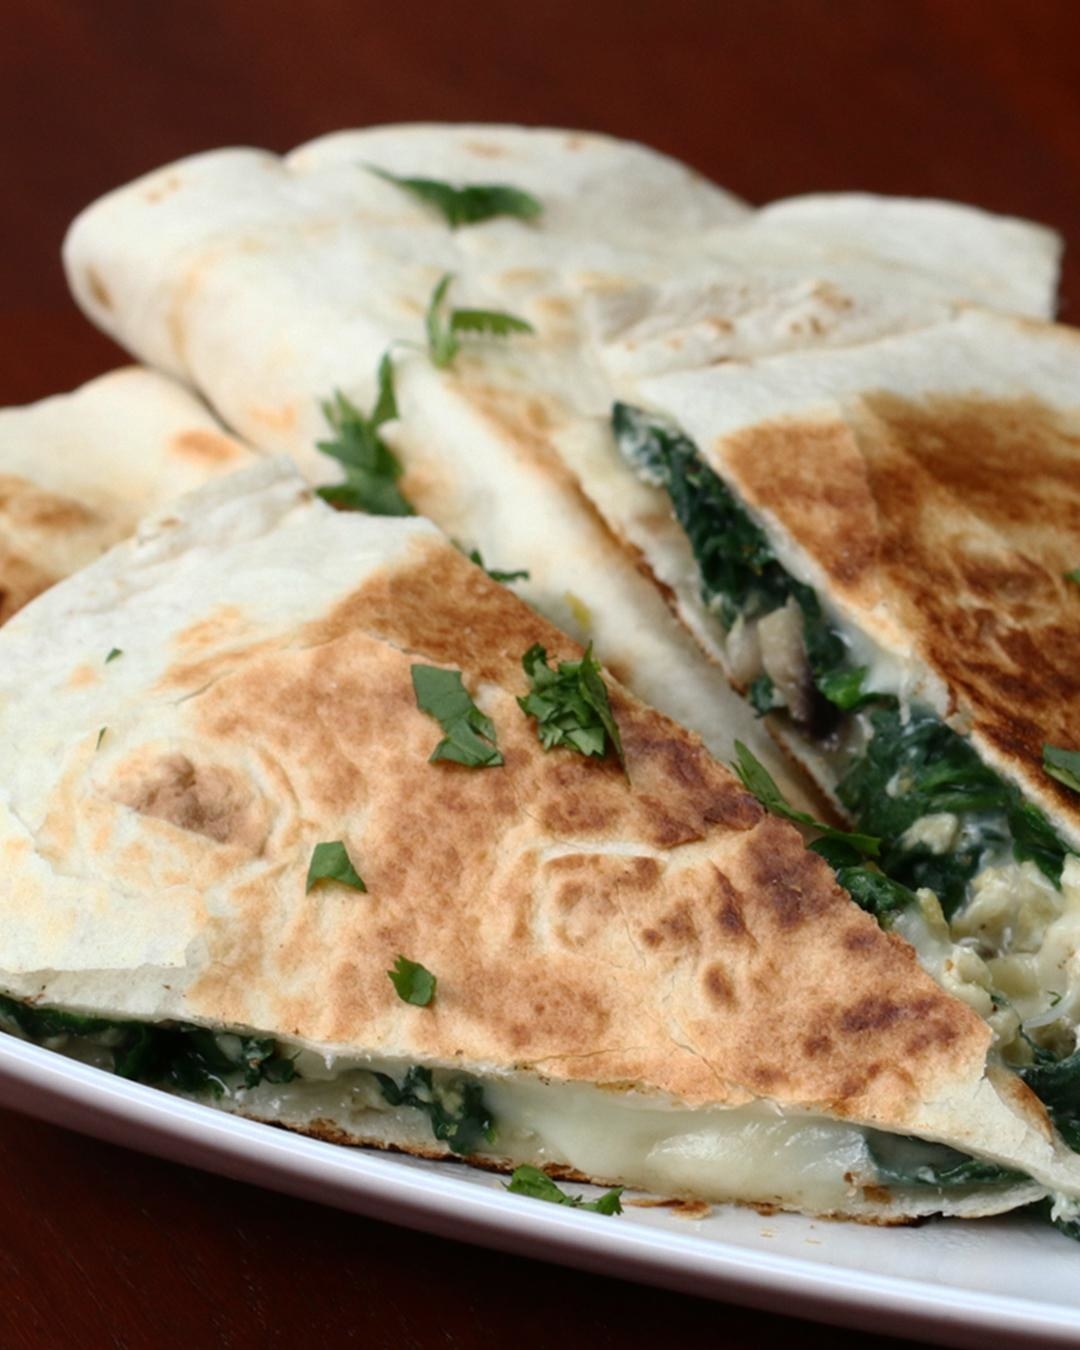 A cheesy quesadilla with spinach and mushroom.